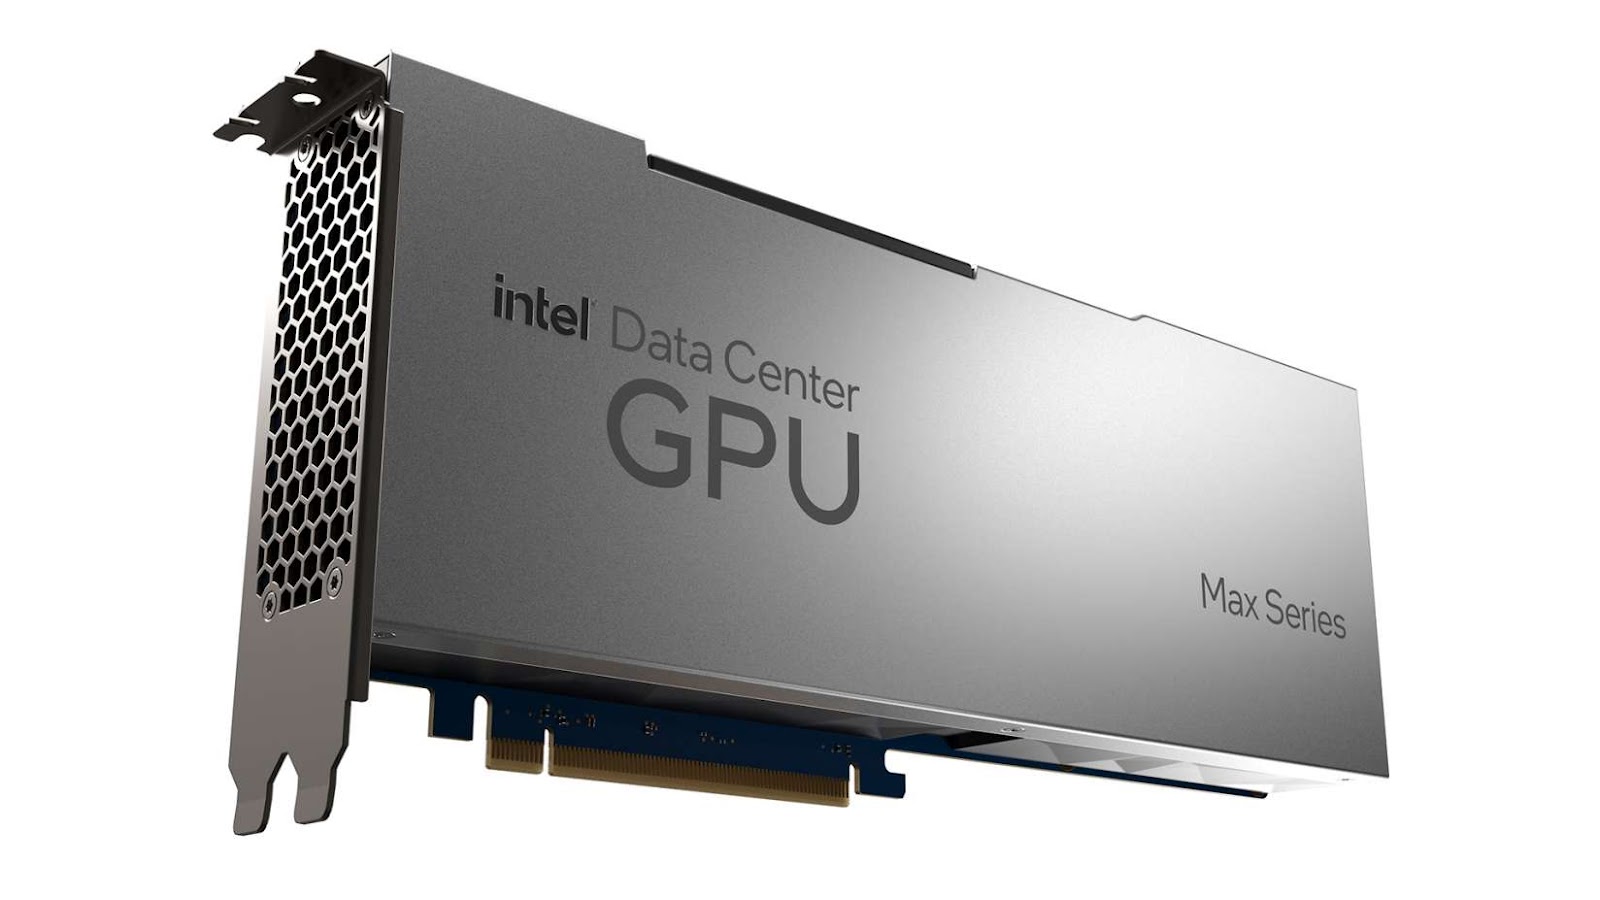 Image of the Intel